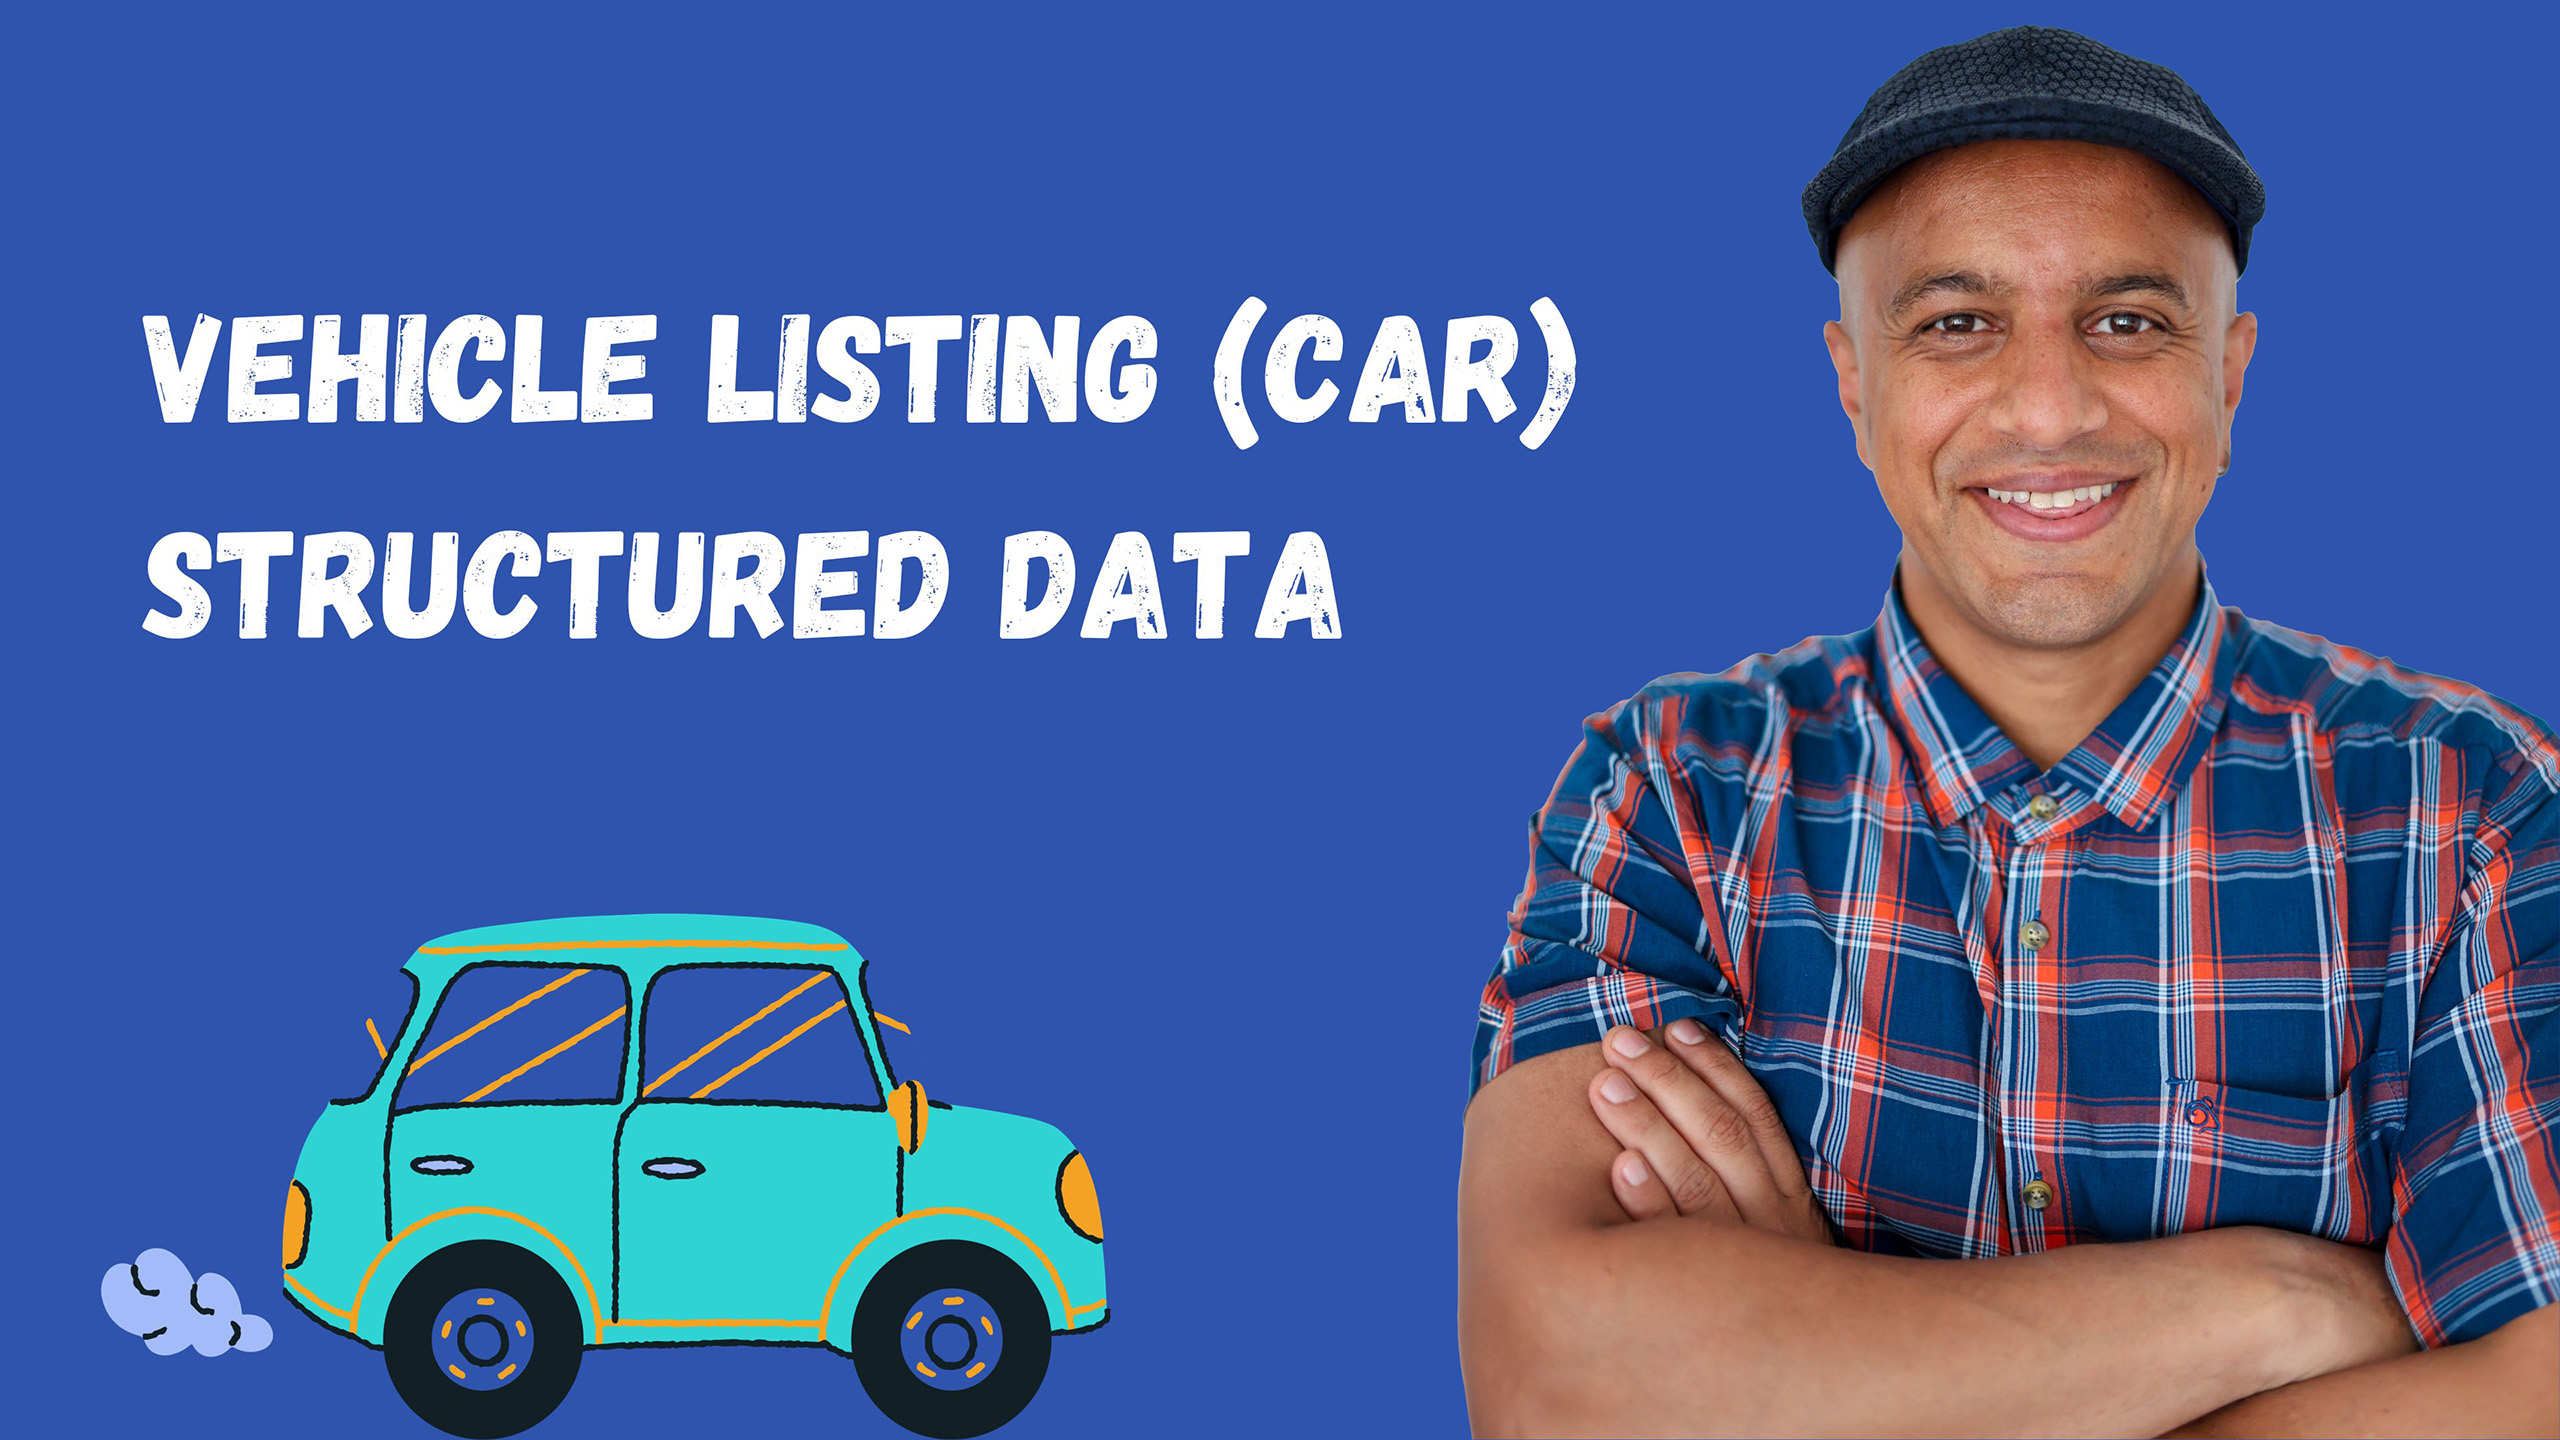 Vehicle listing (Car) structured data